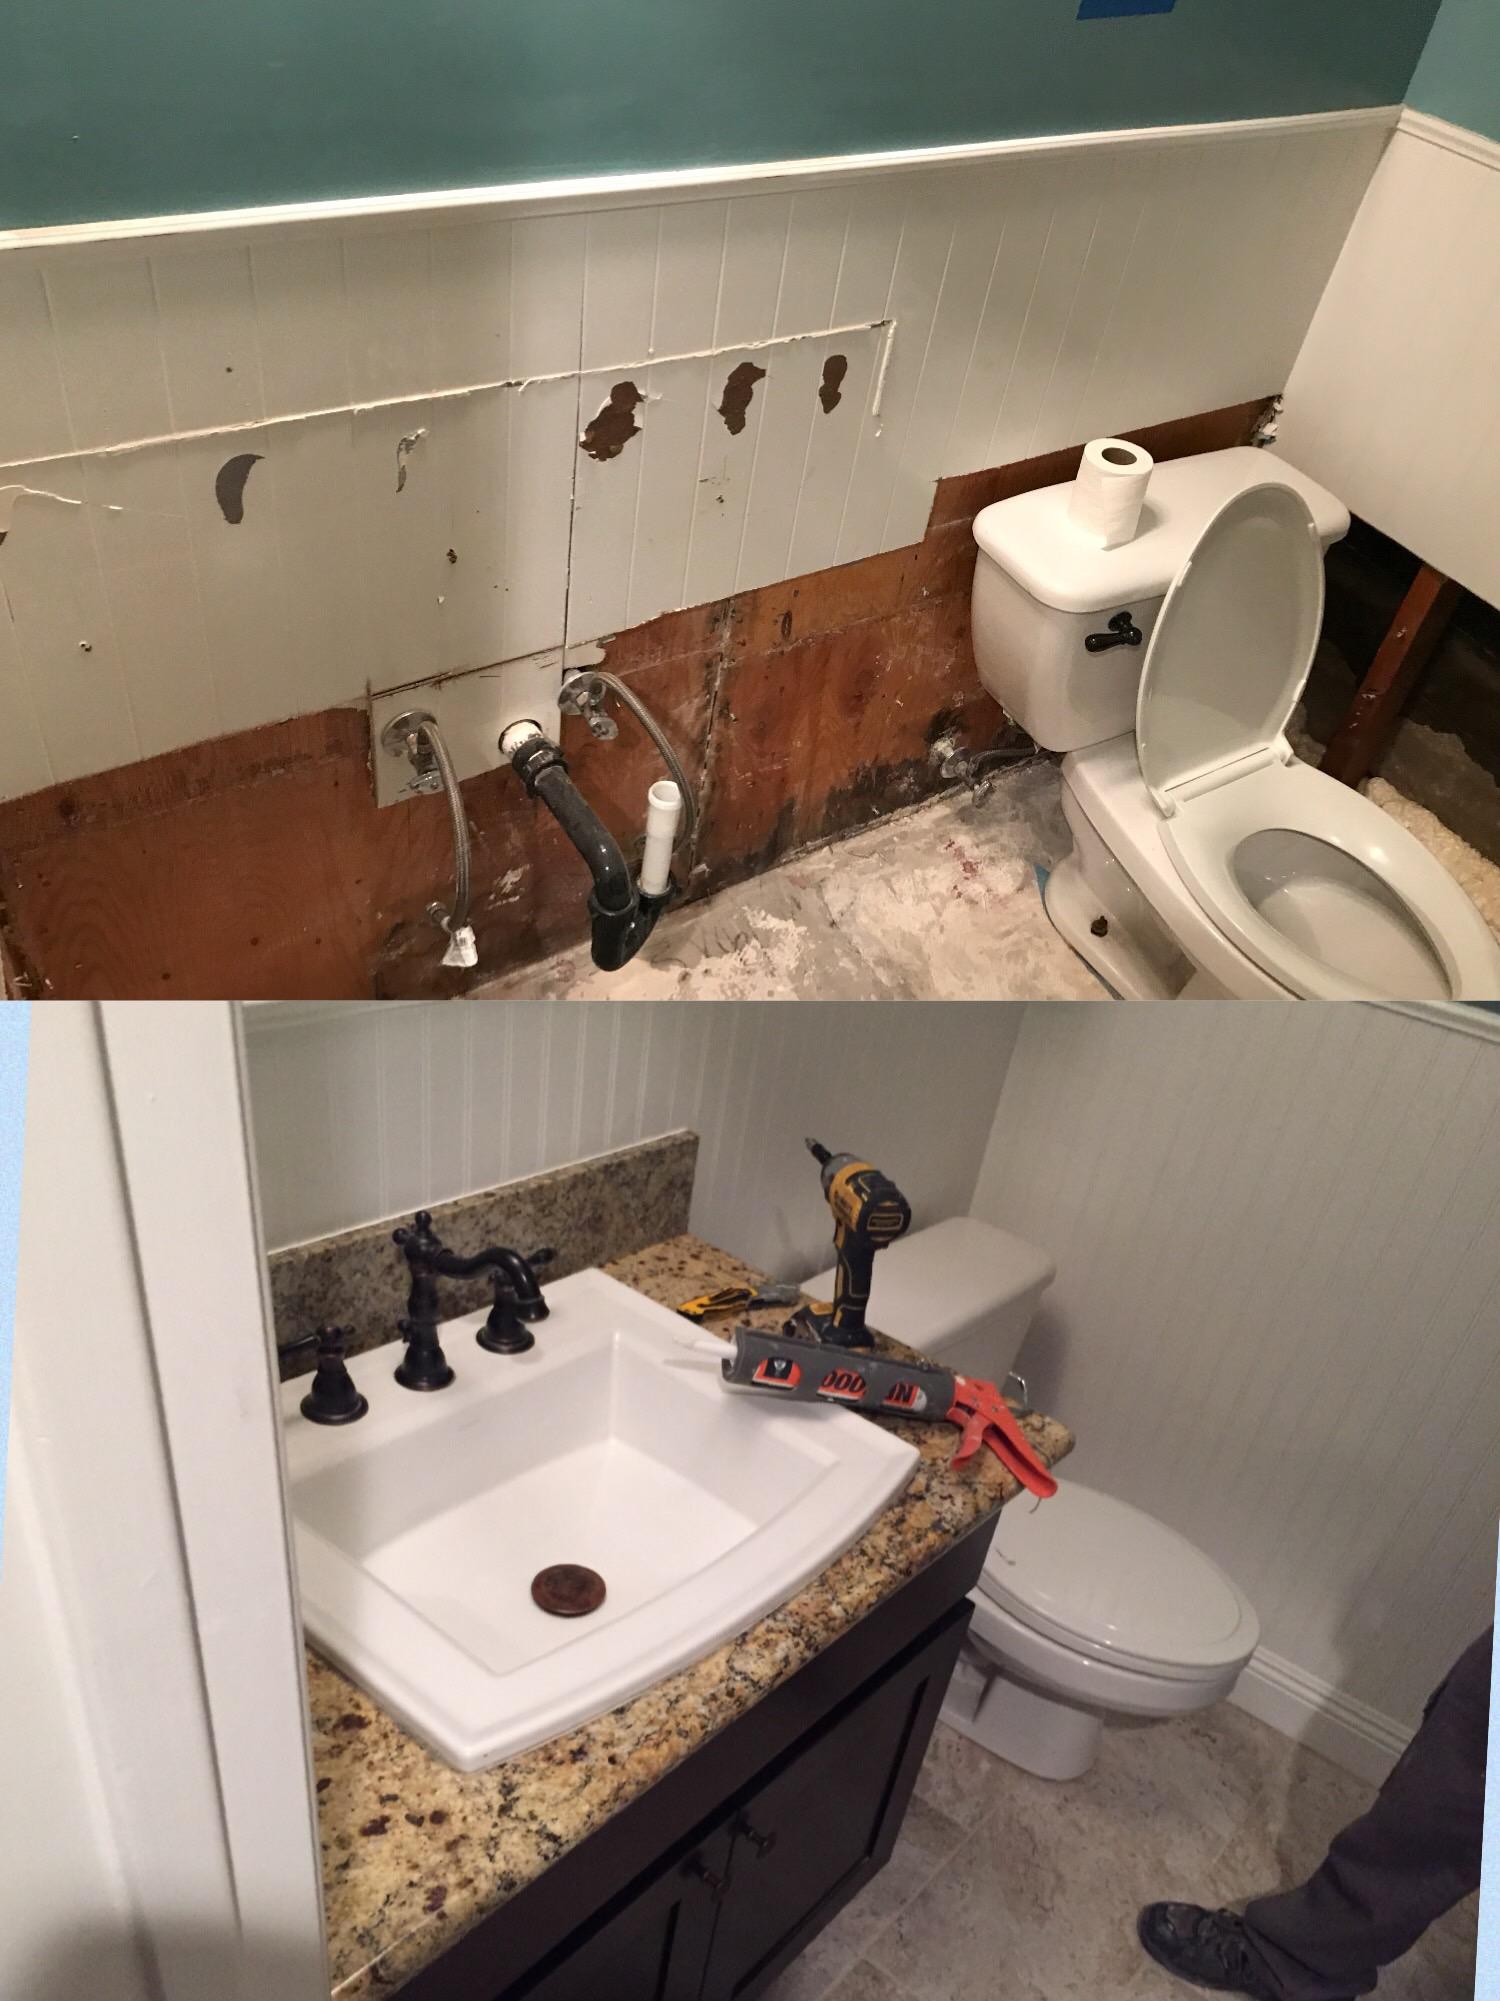 Before and after a restoration job in a bathroom.